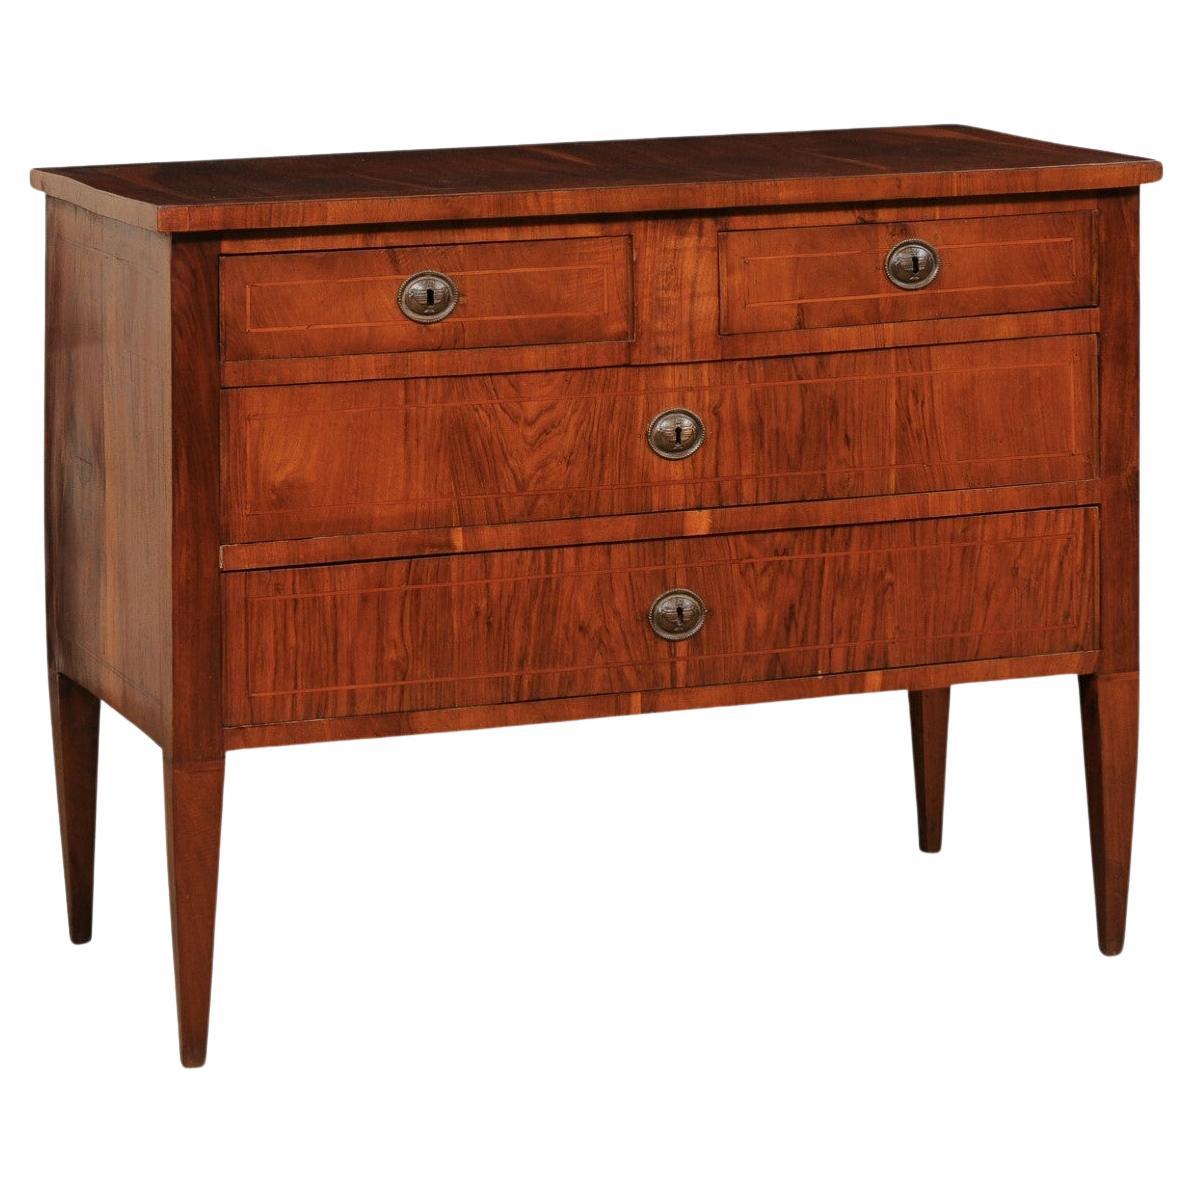 Early 19th C. Italian Chest of Drawers w/Inlay Banding, Designed w/Clean Lines